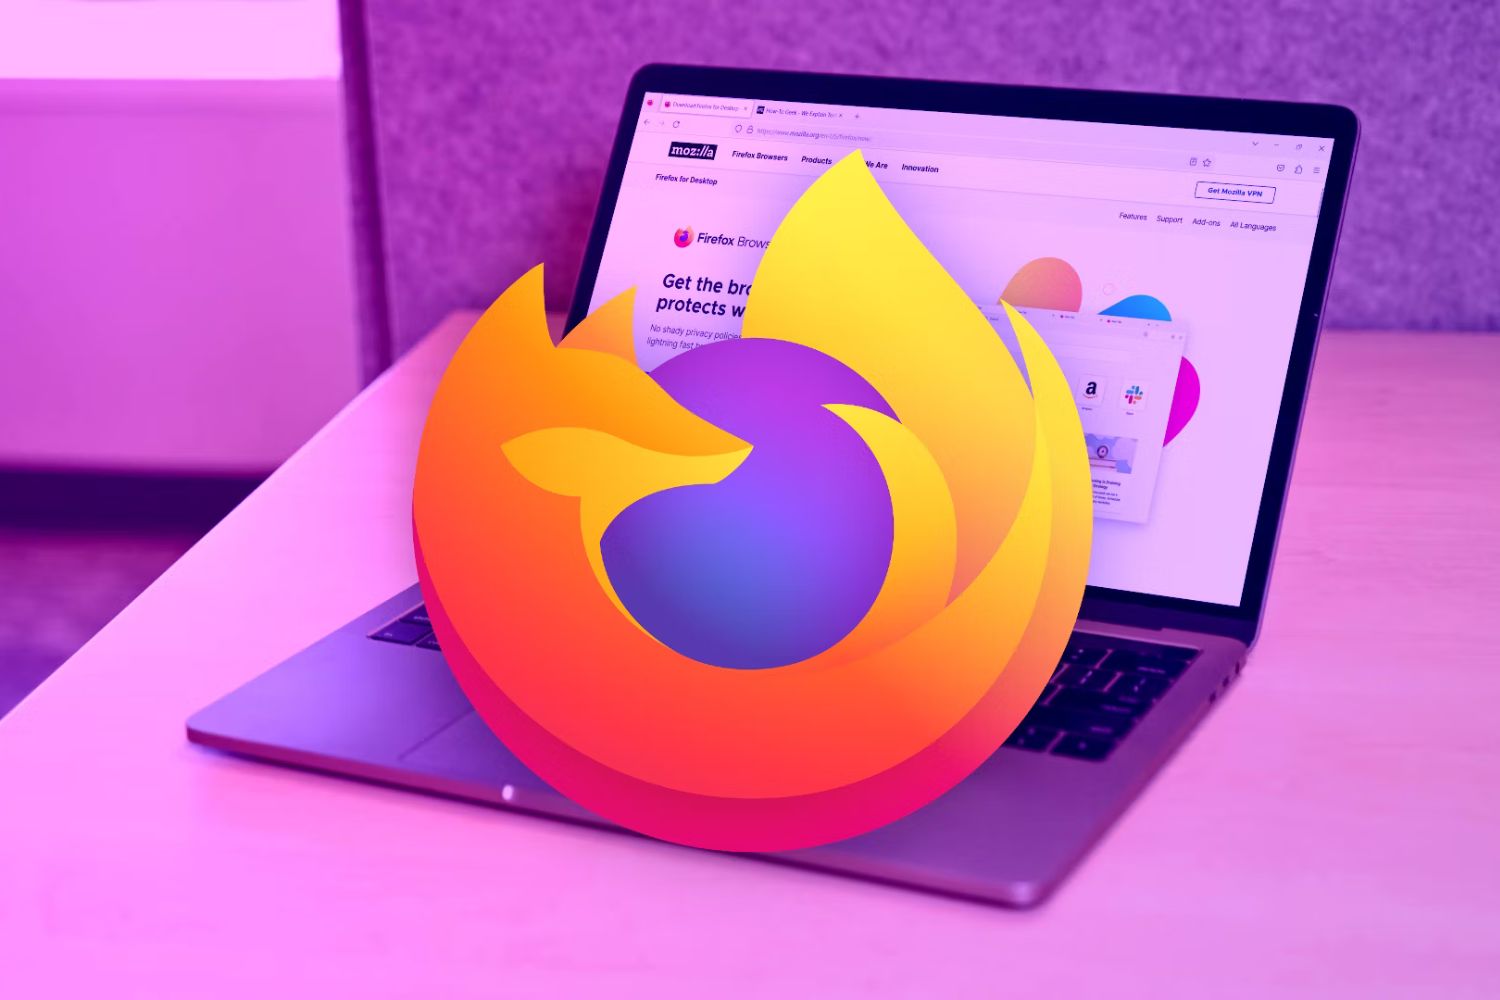 How To Clear Cache On Firefox For Mac